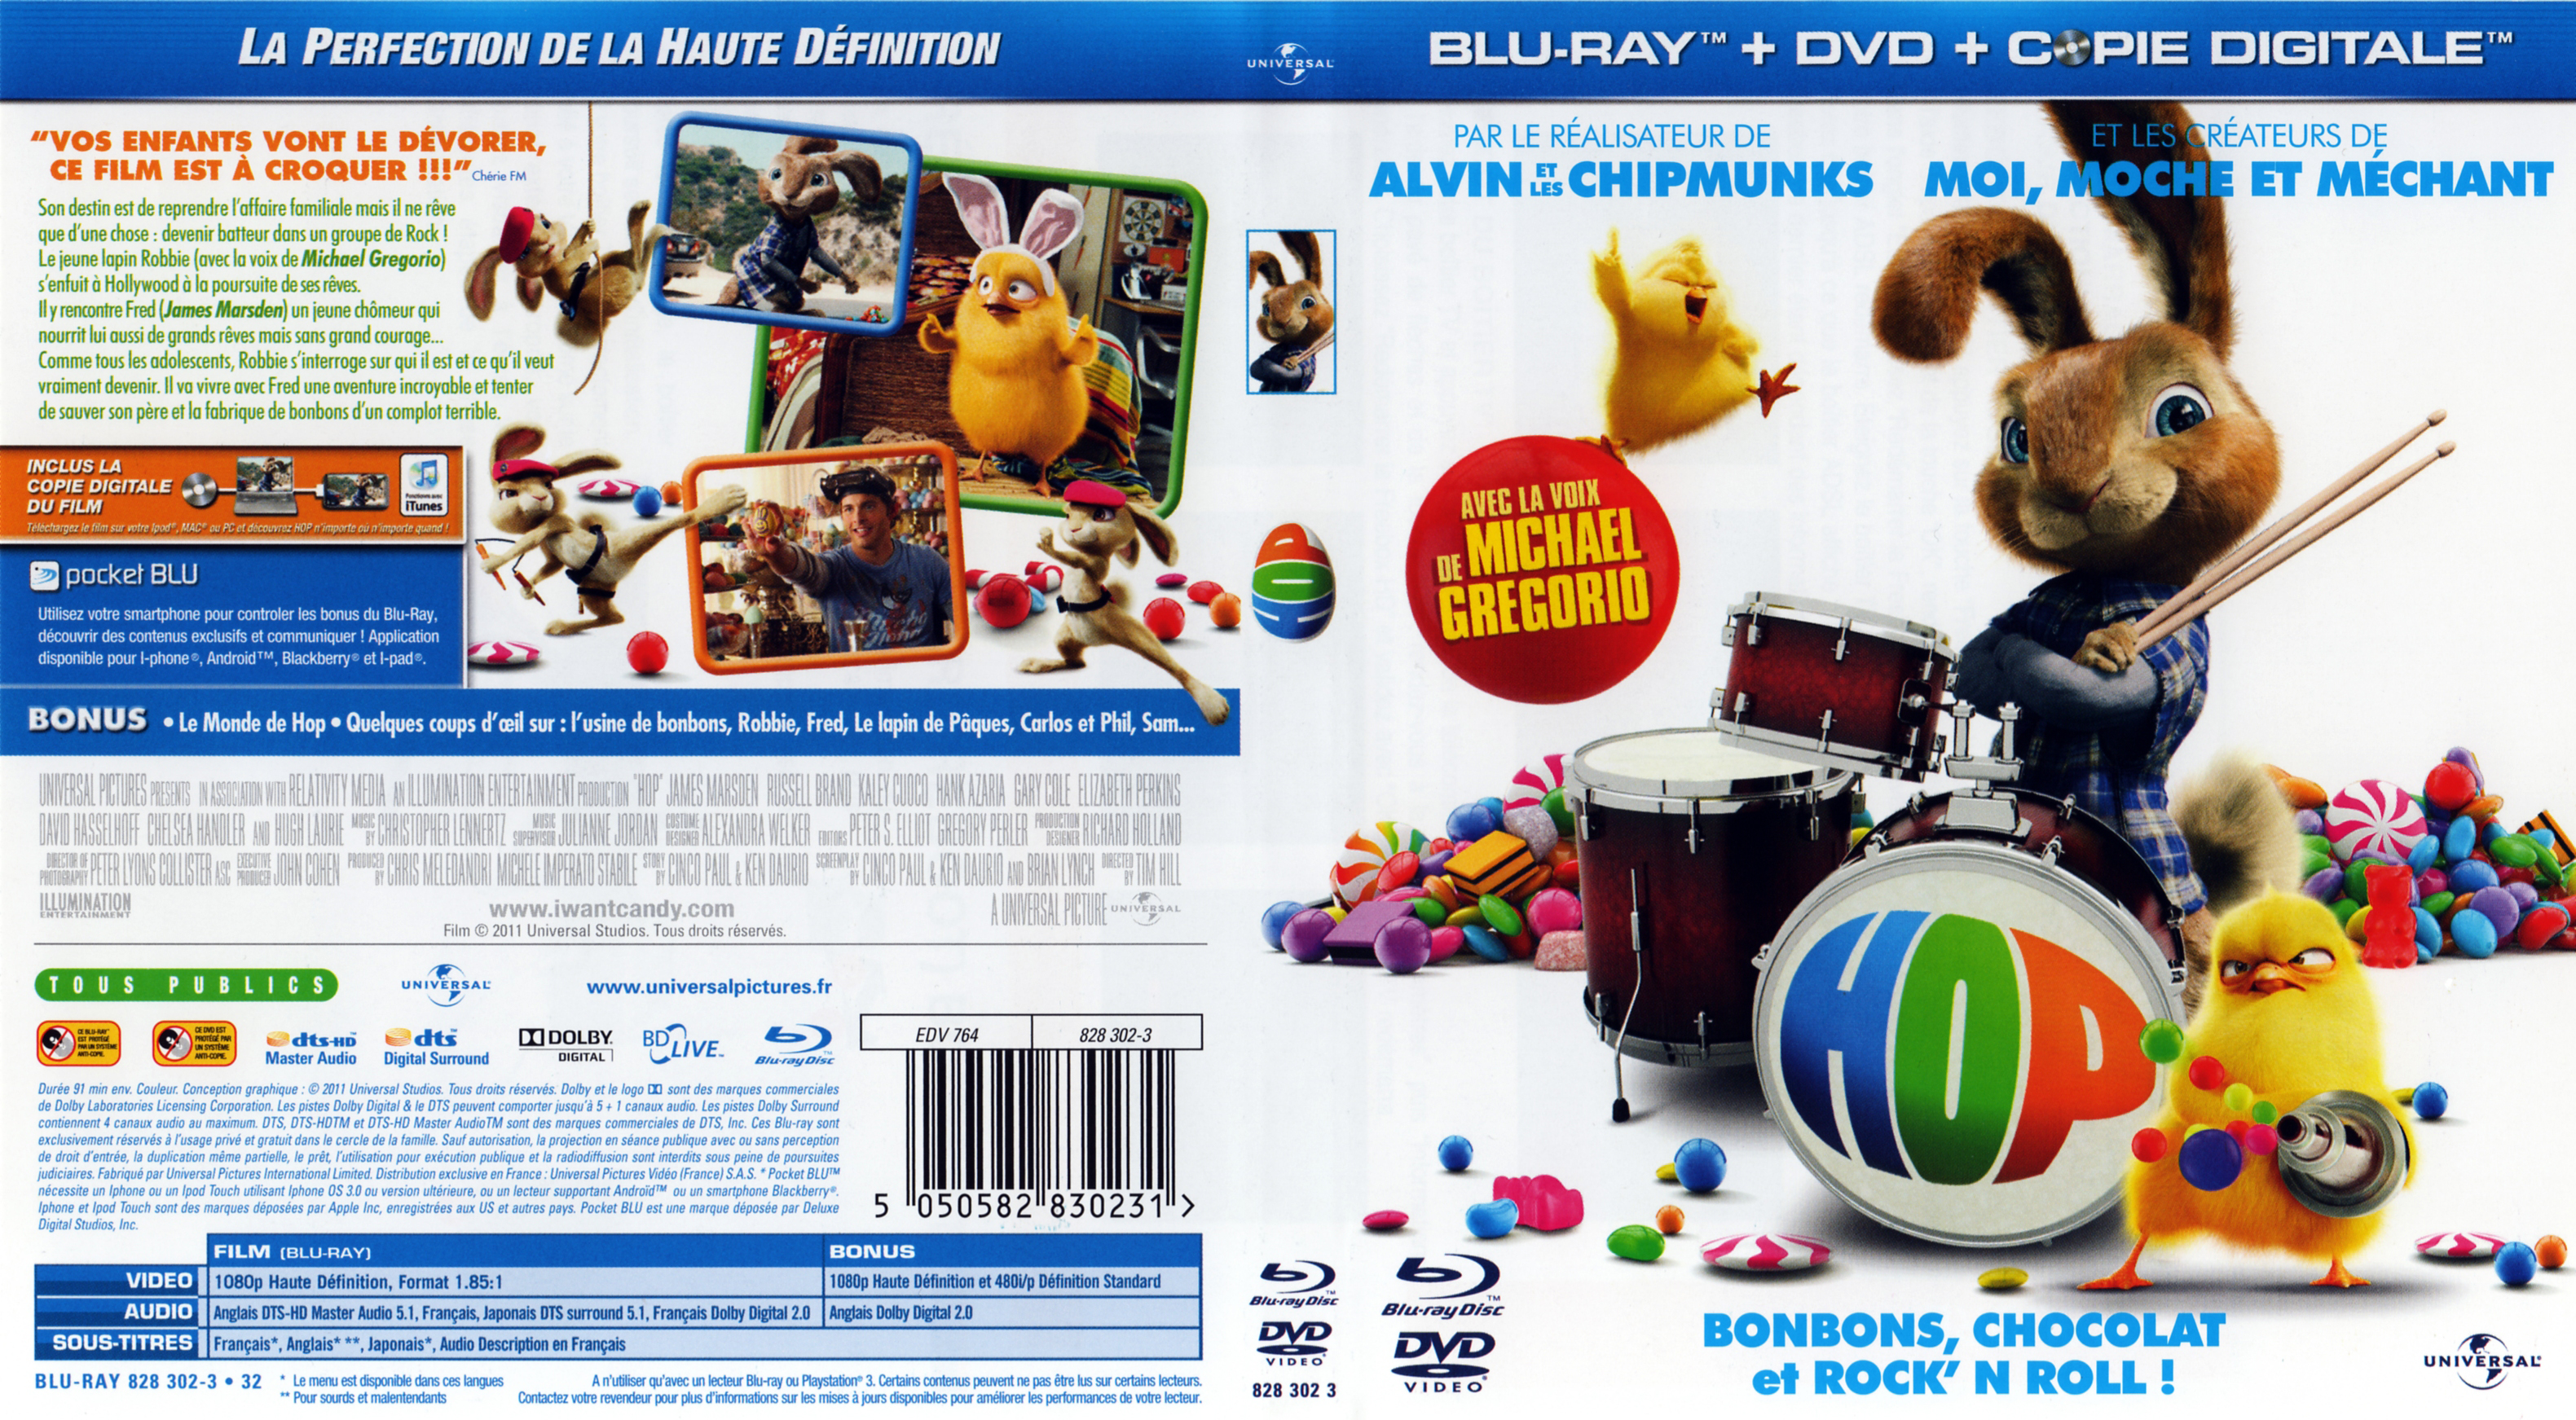 Jaquette DVD Hop (BLU-RAY)